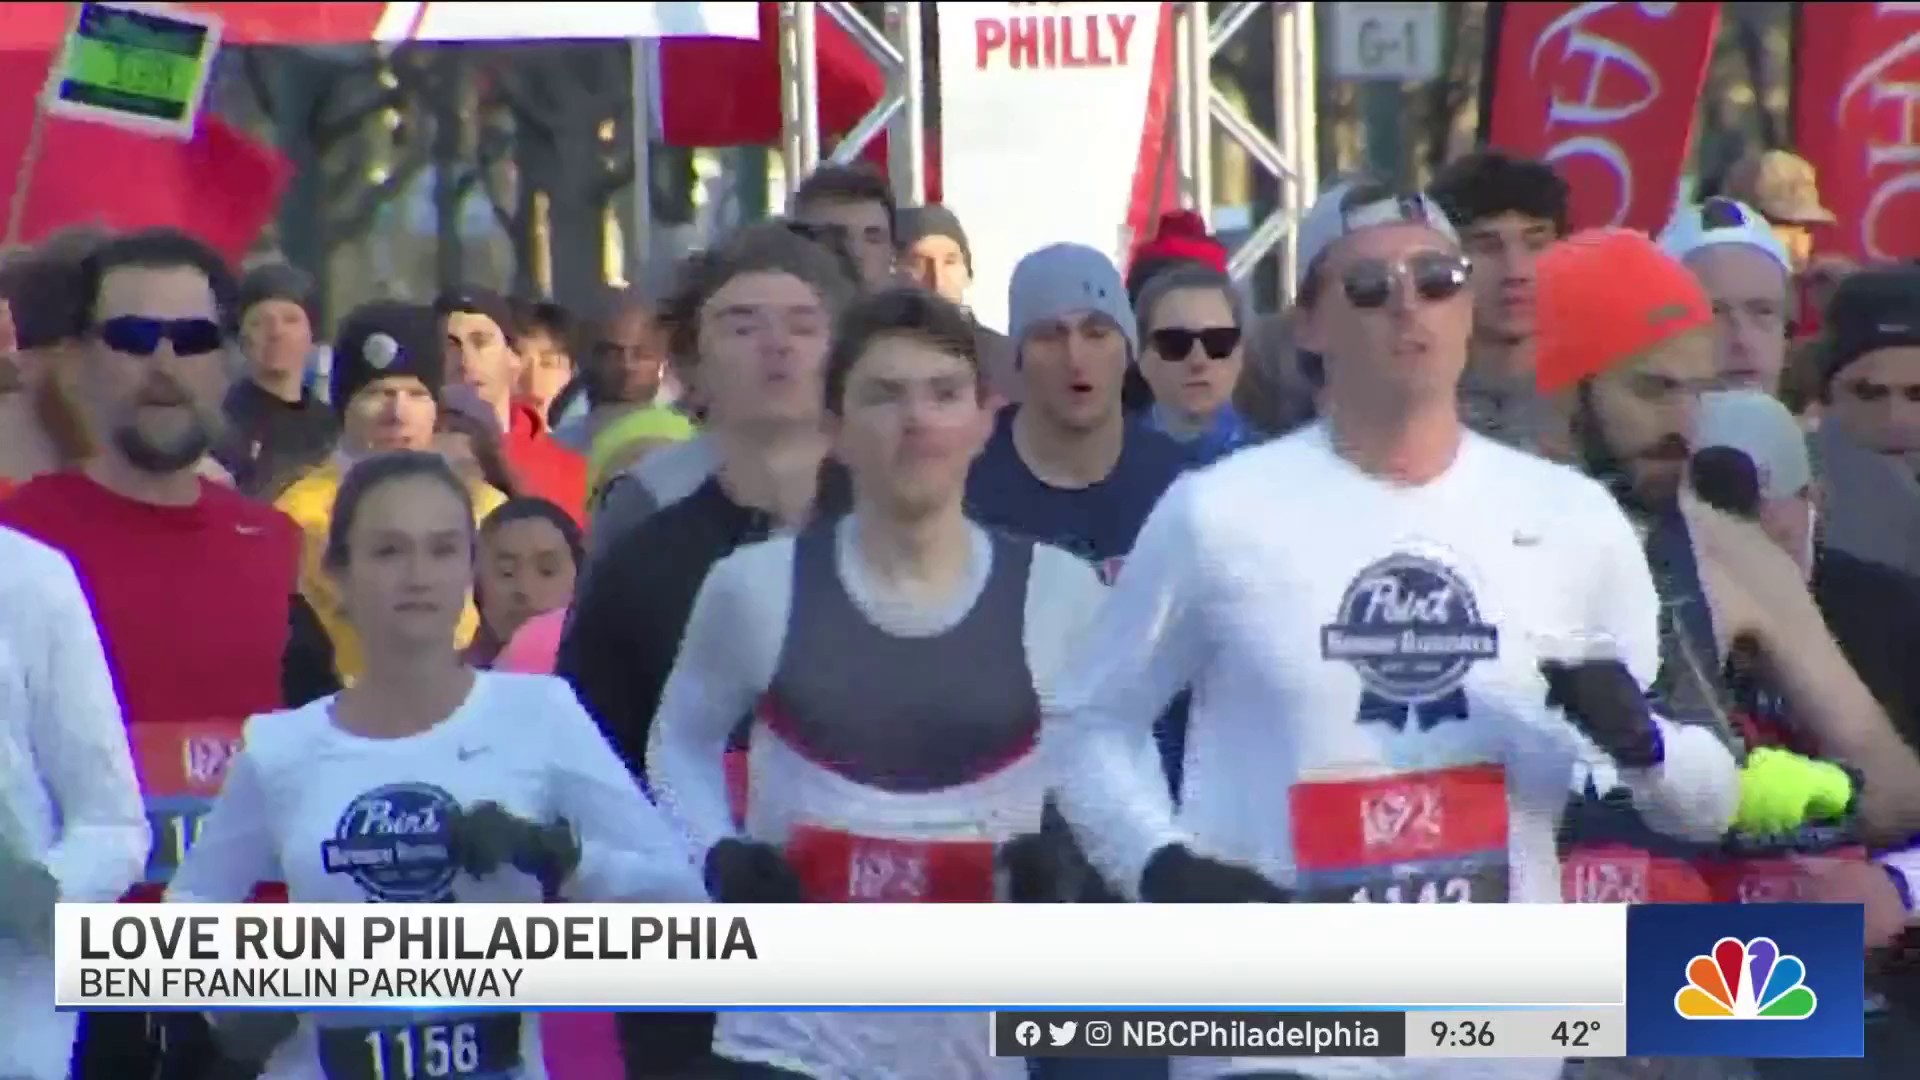 Photos from the Love Run Philadelphia on the Parkway.